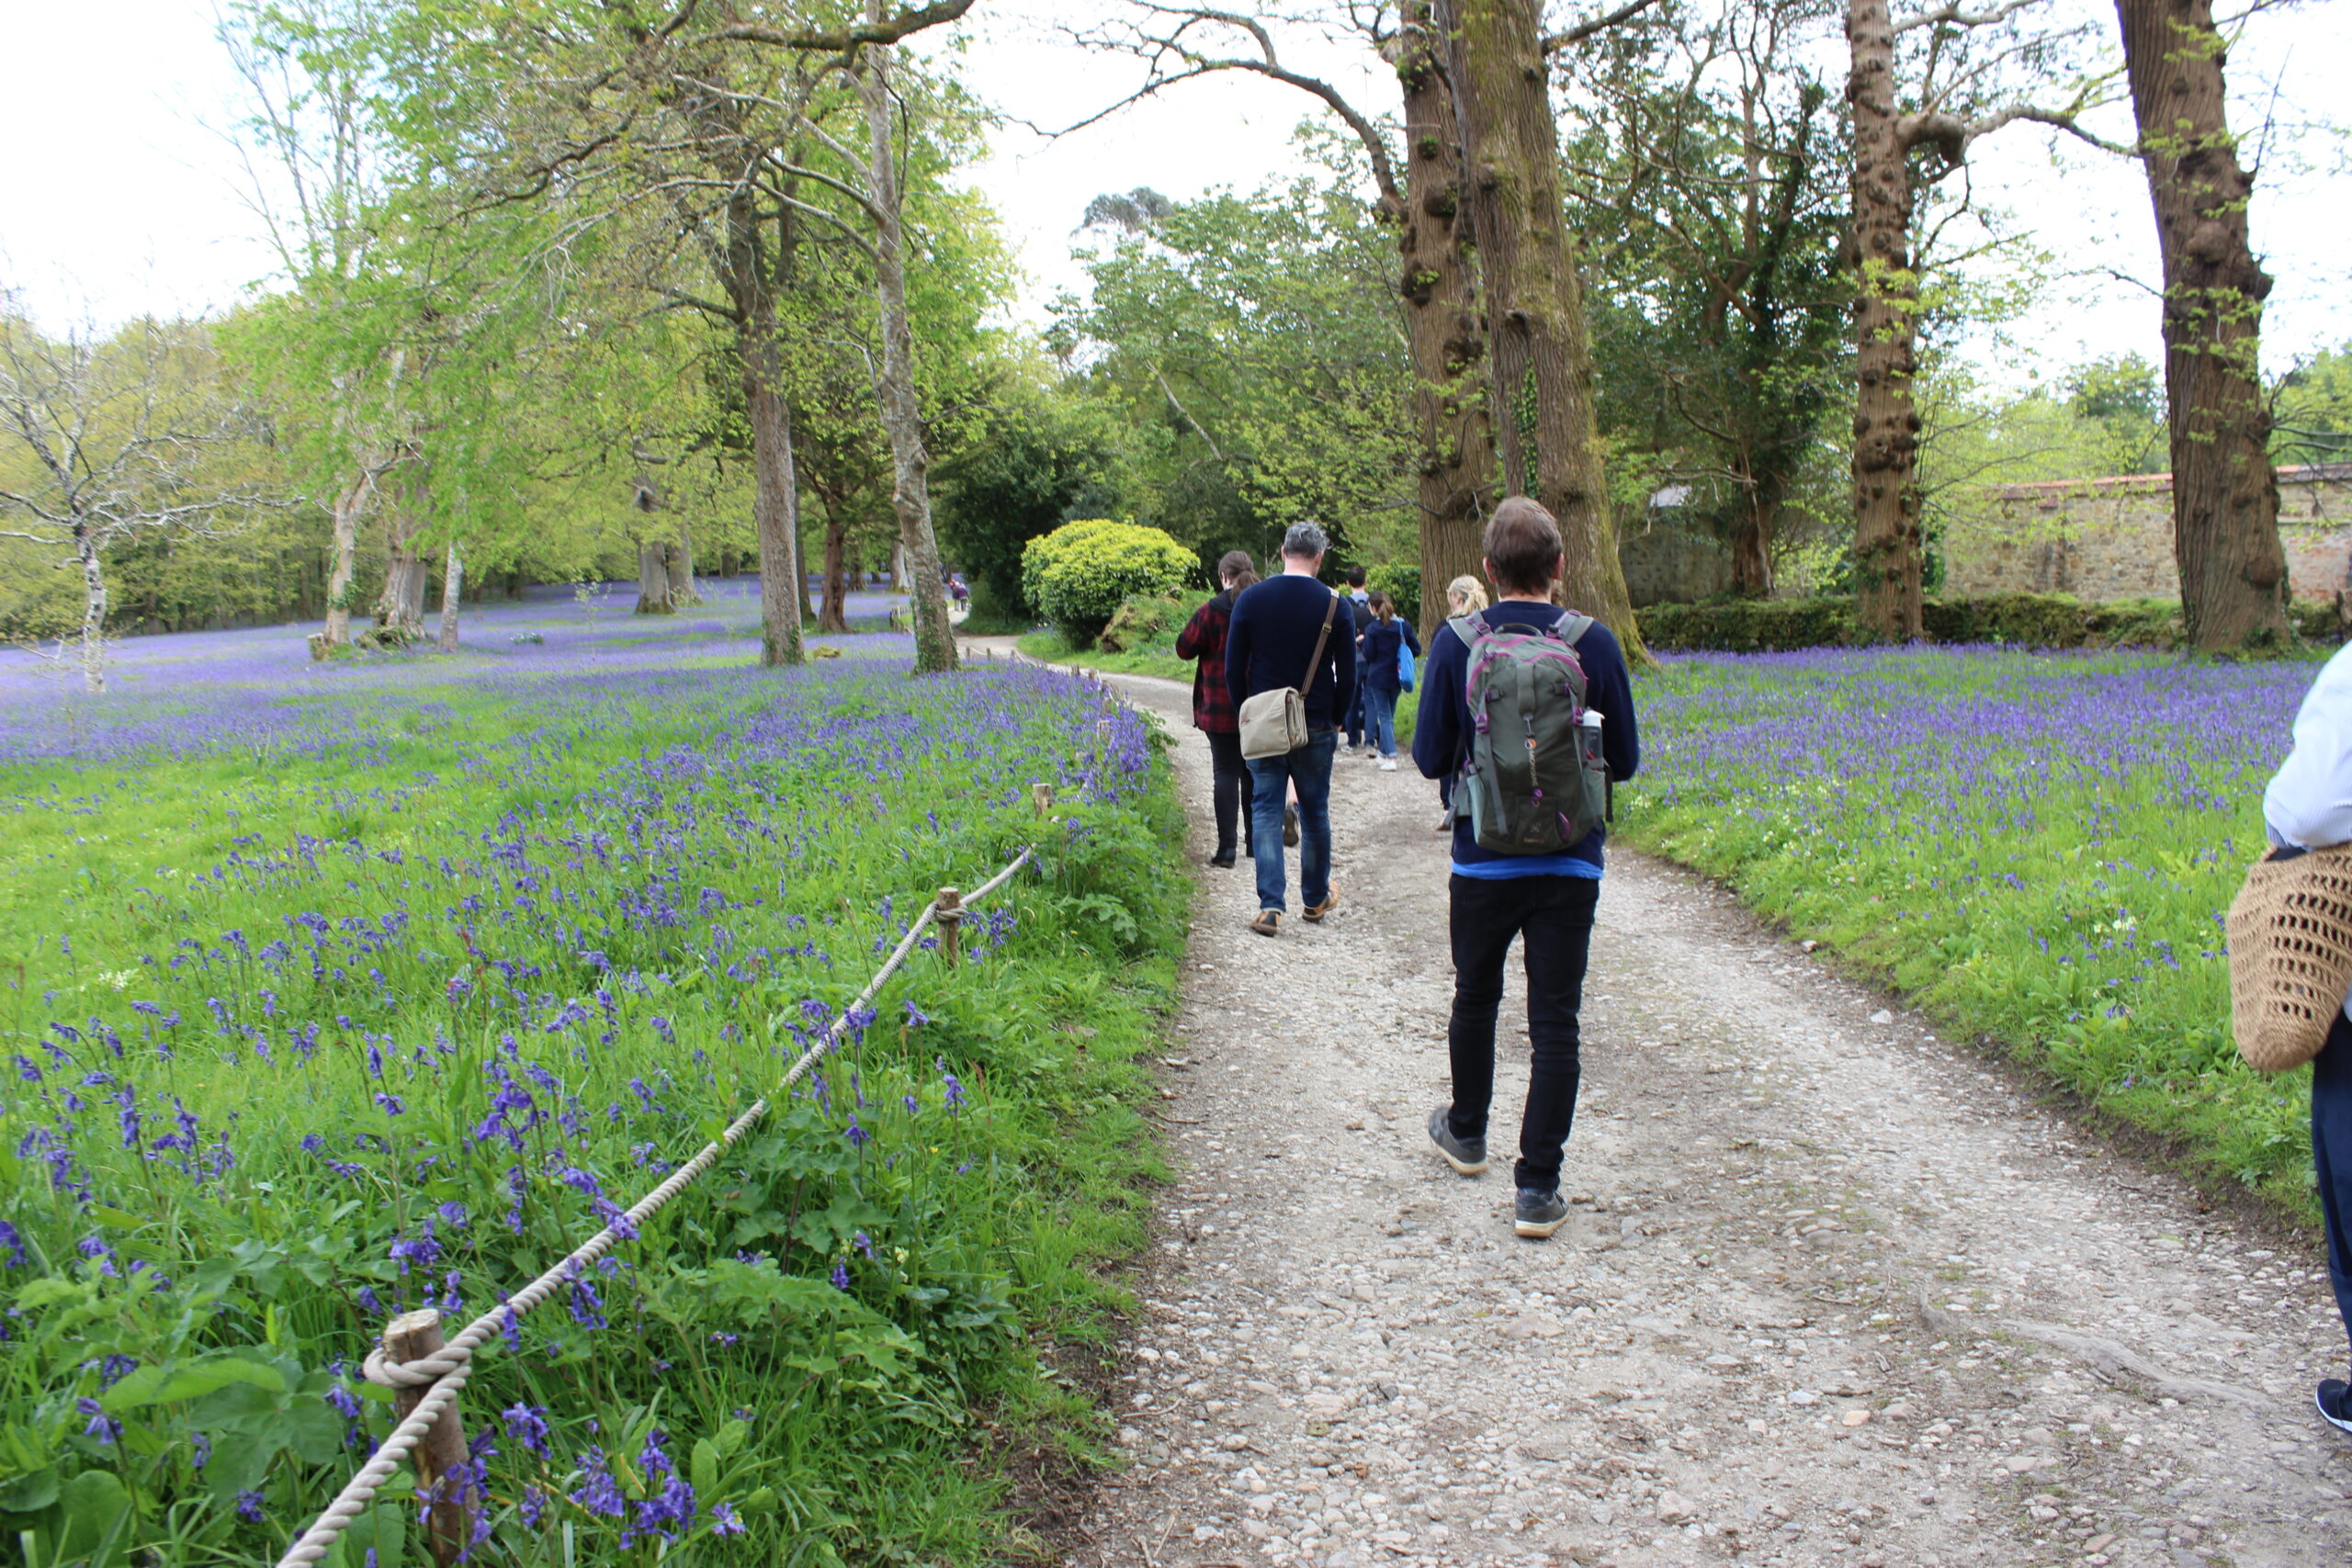 The path through Parc Lye the bluebell meadow at Enys Gardens